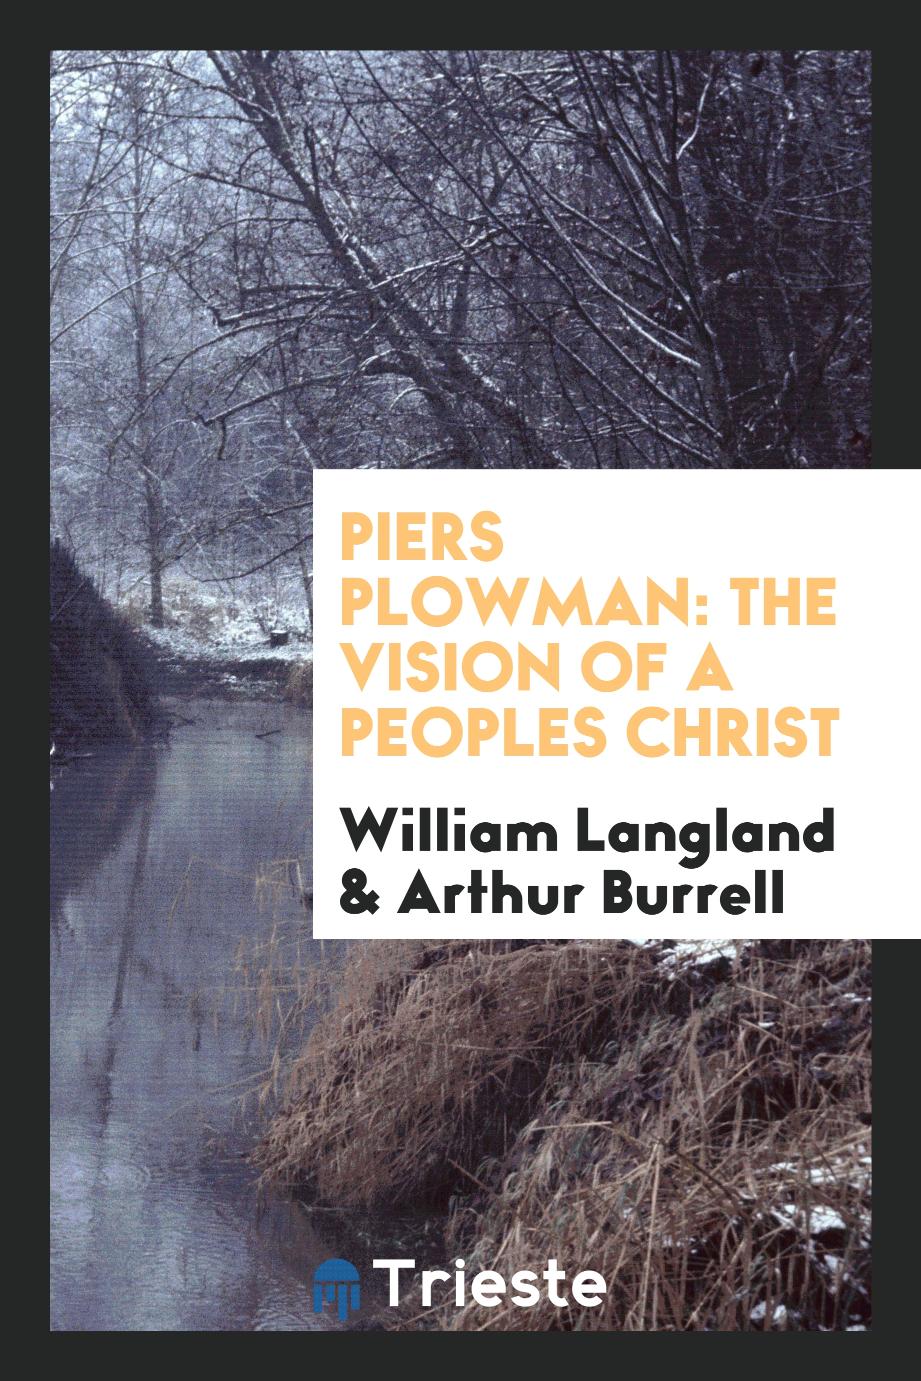 Piers Plowman: the vision of a peoples Christ